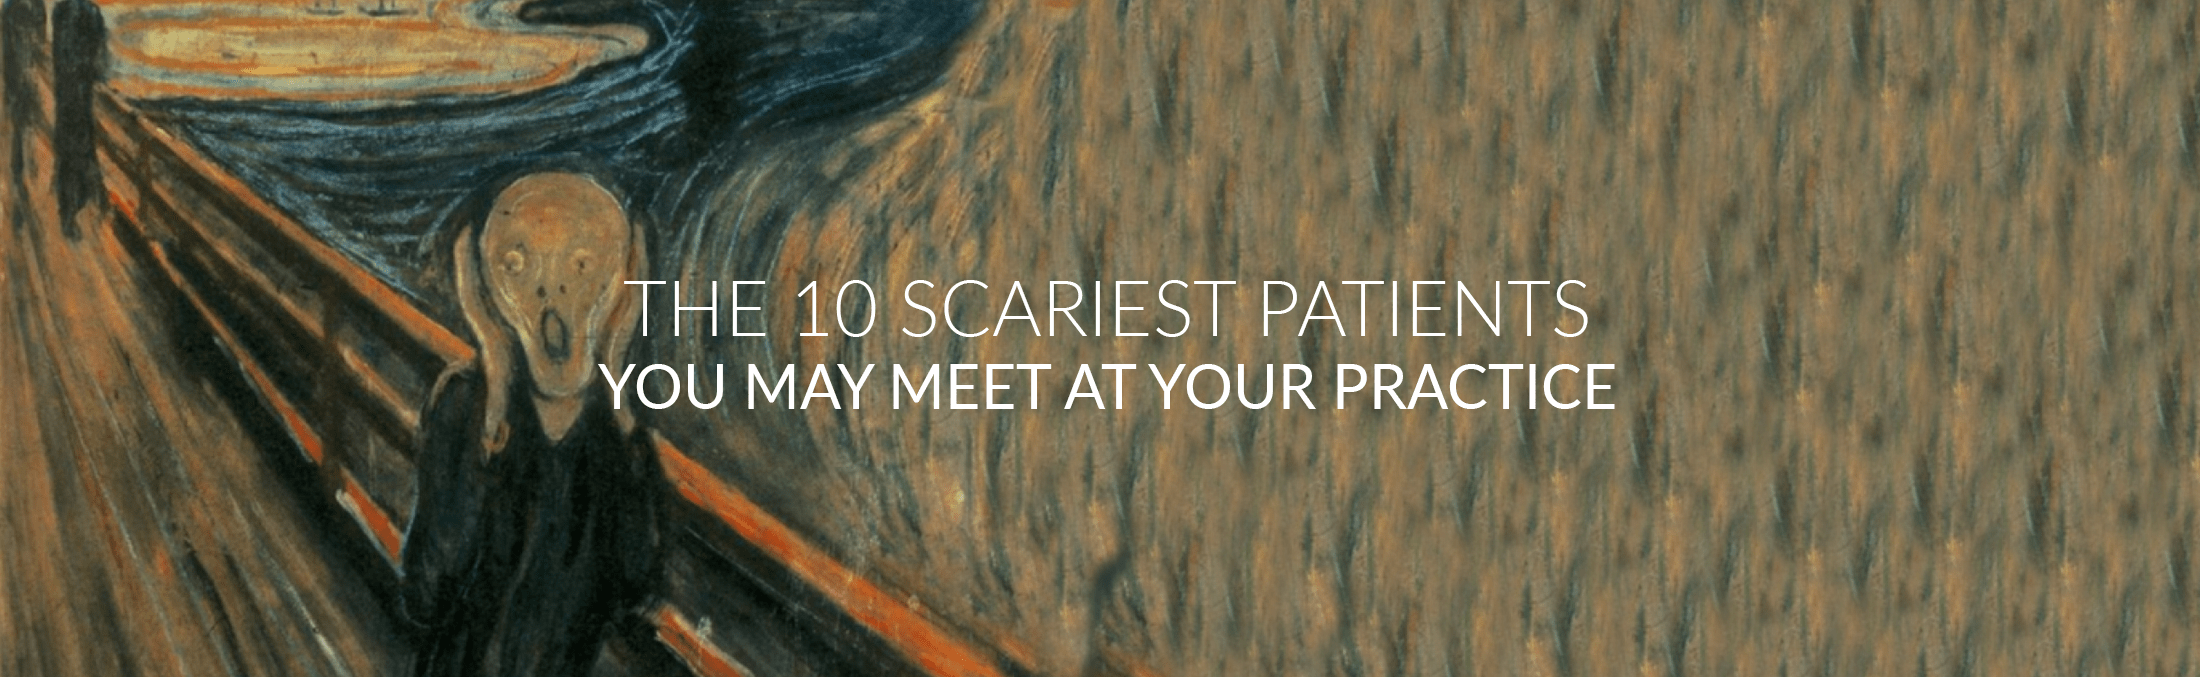 the 10 scariest patients you may meet at your practice